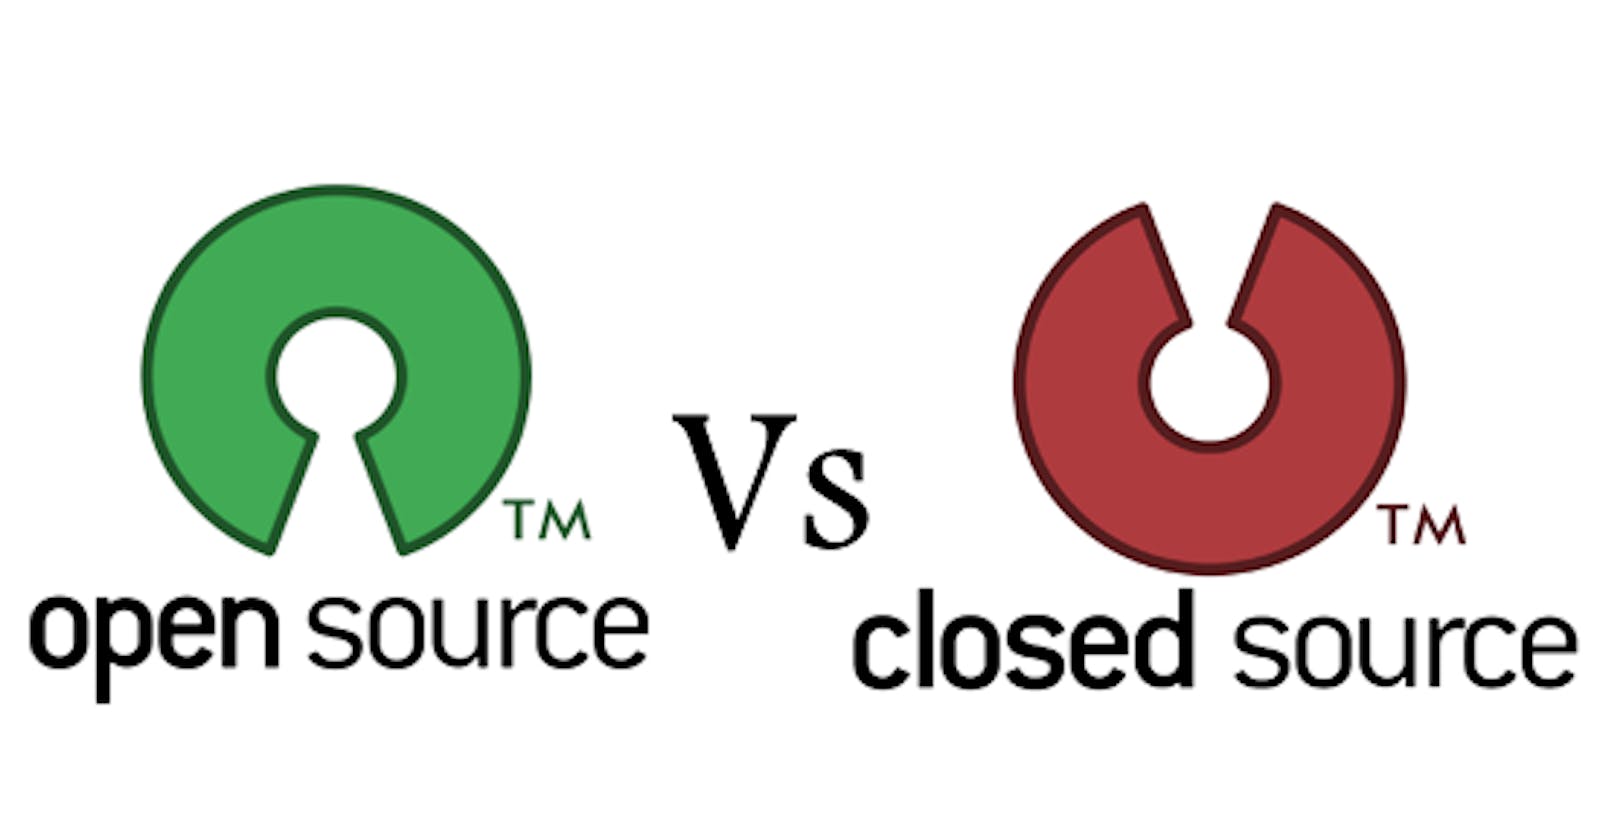 Open source vs. closed source: which is more accessible?